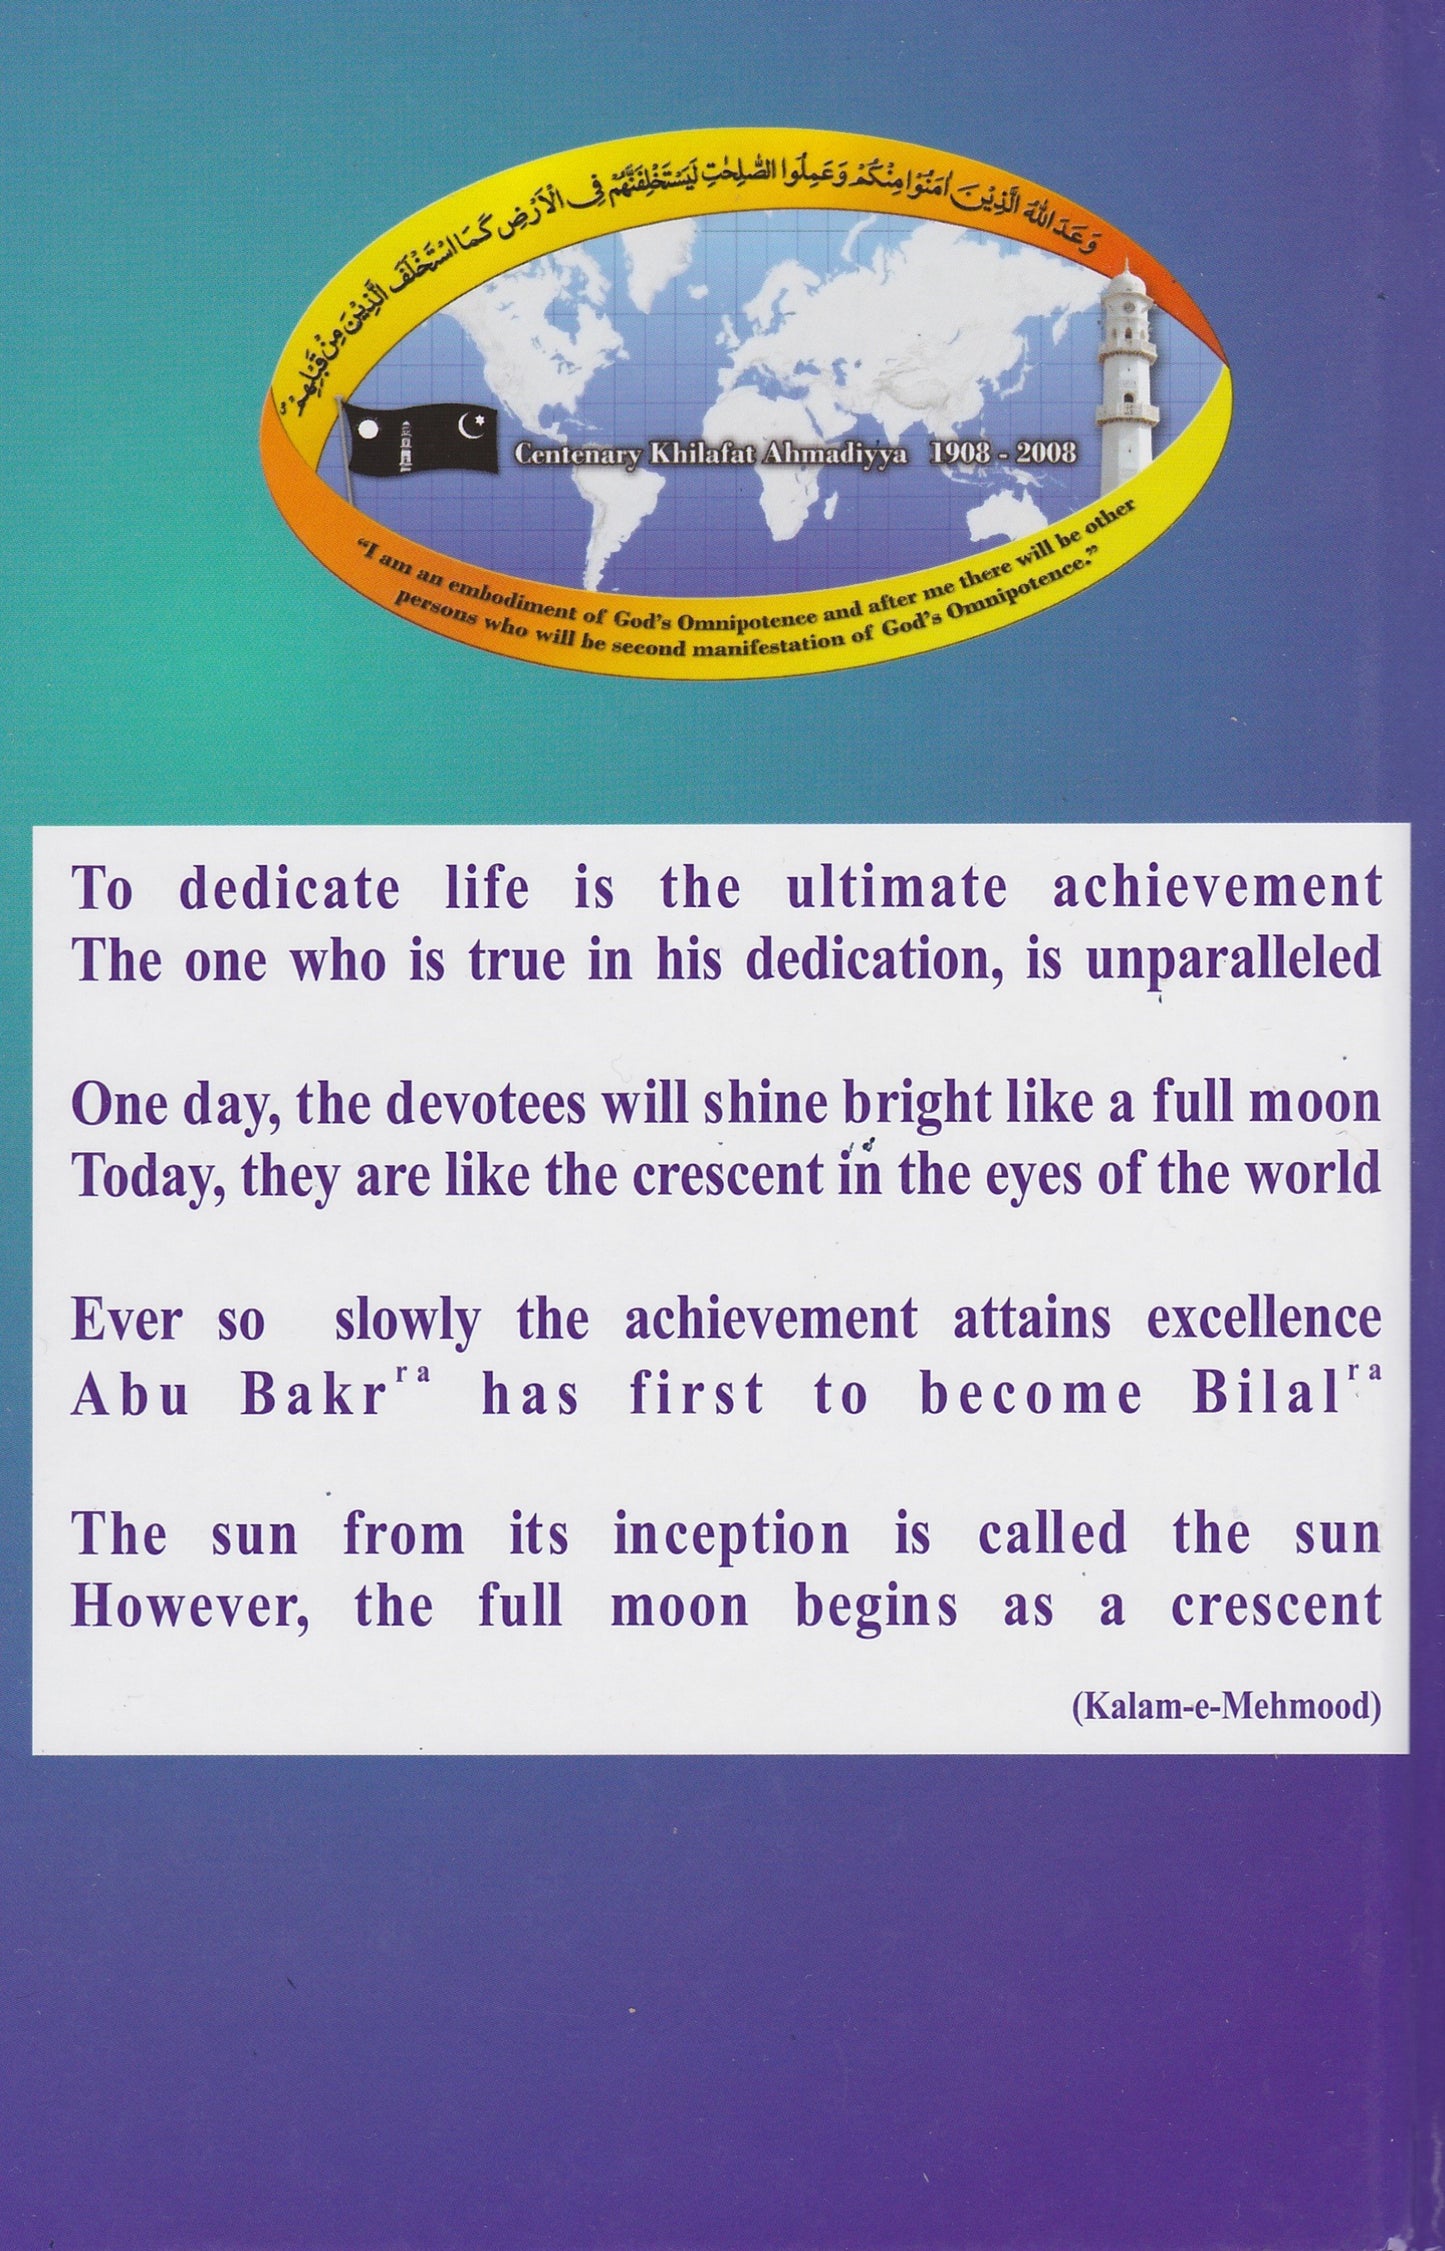 The Devotion of Life - Its Importance and Blessings